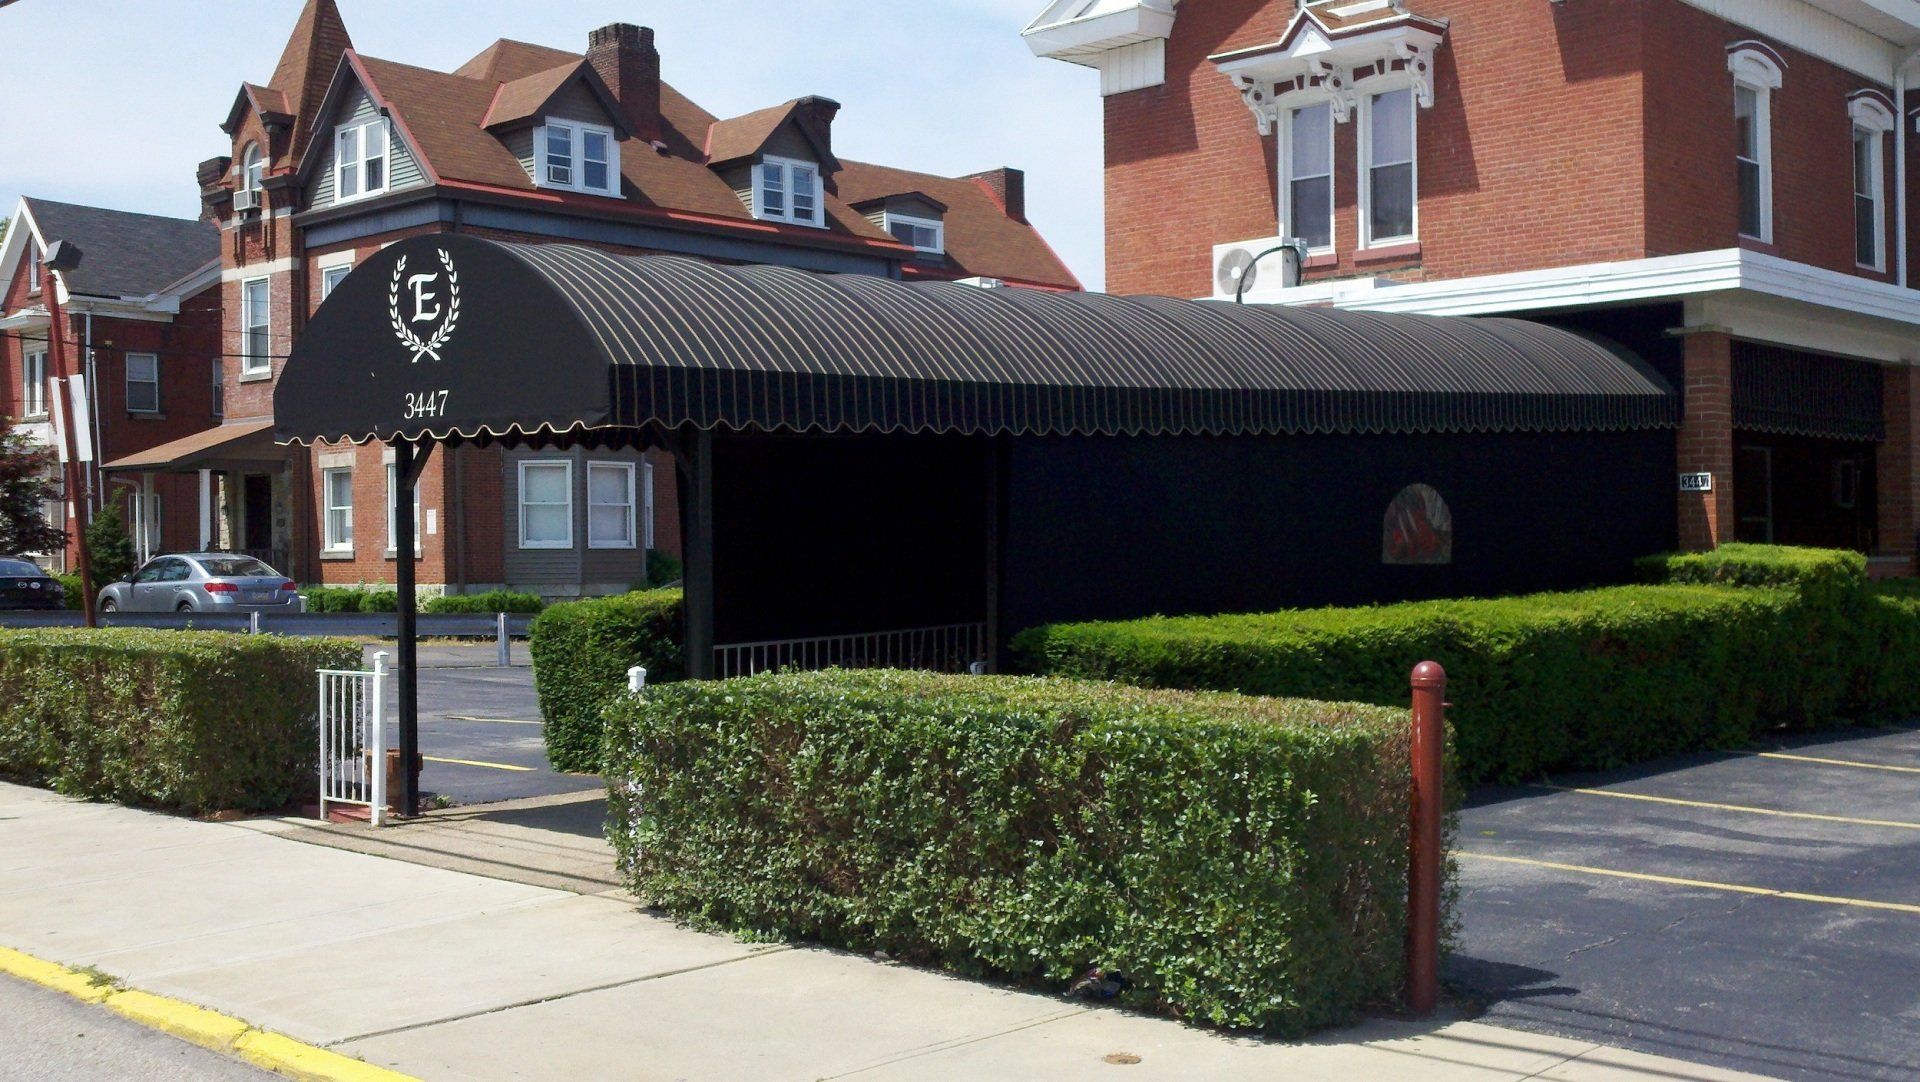 Commercial awning-16 — Custom awnings in Pittsburgh, PA